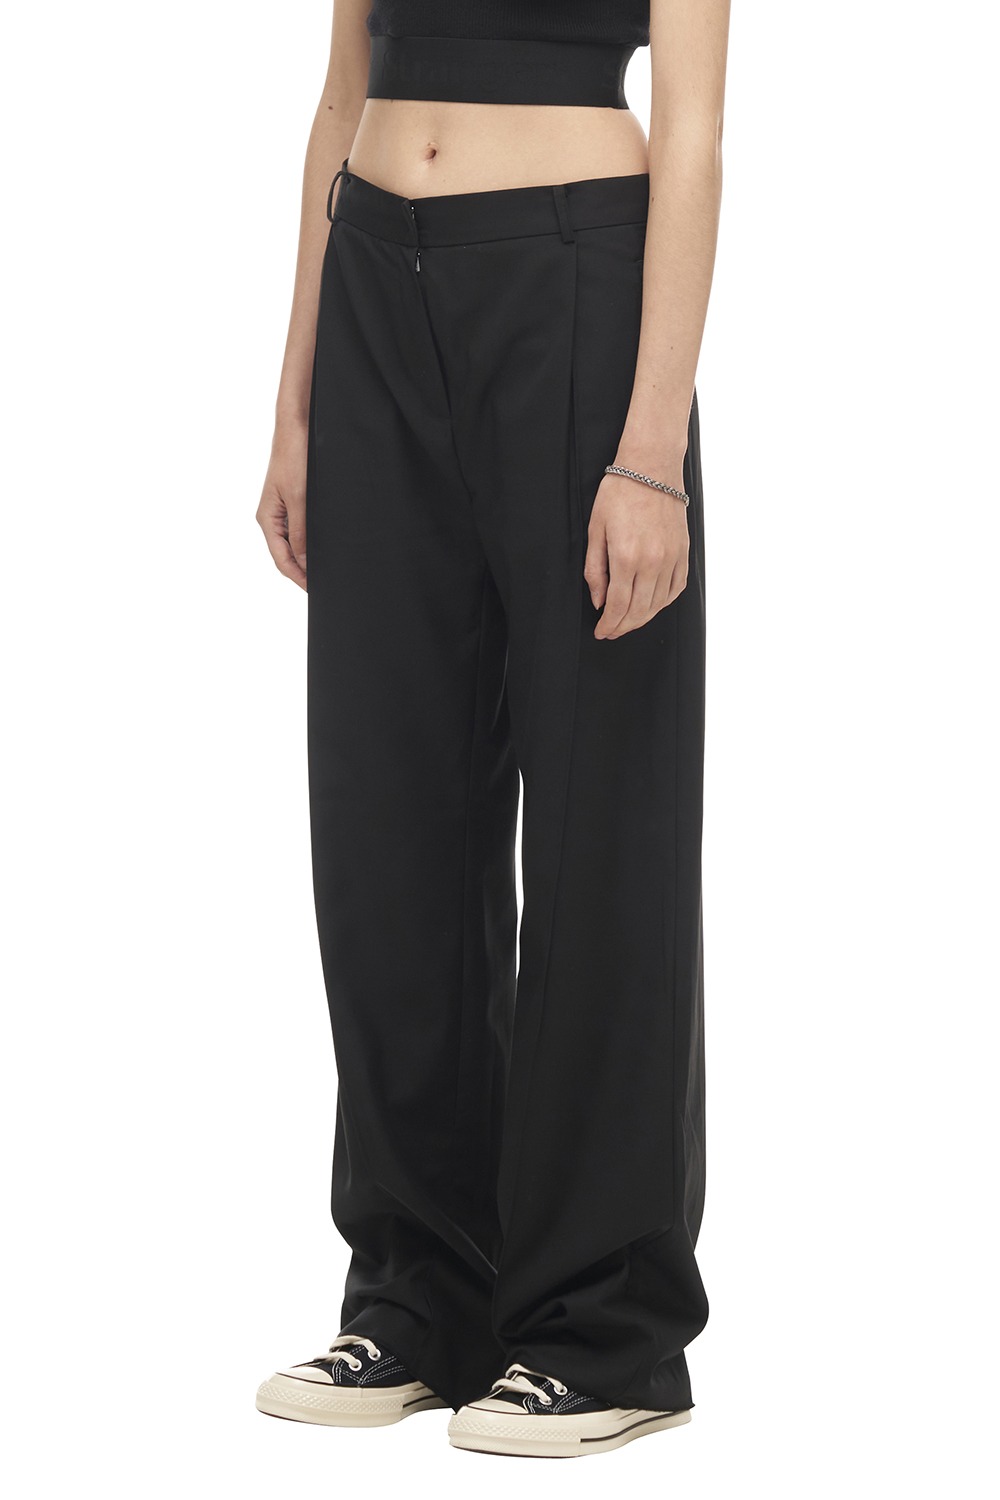 AHEAD OF THE CURVE TROUSERS